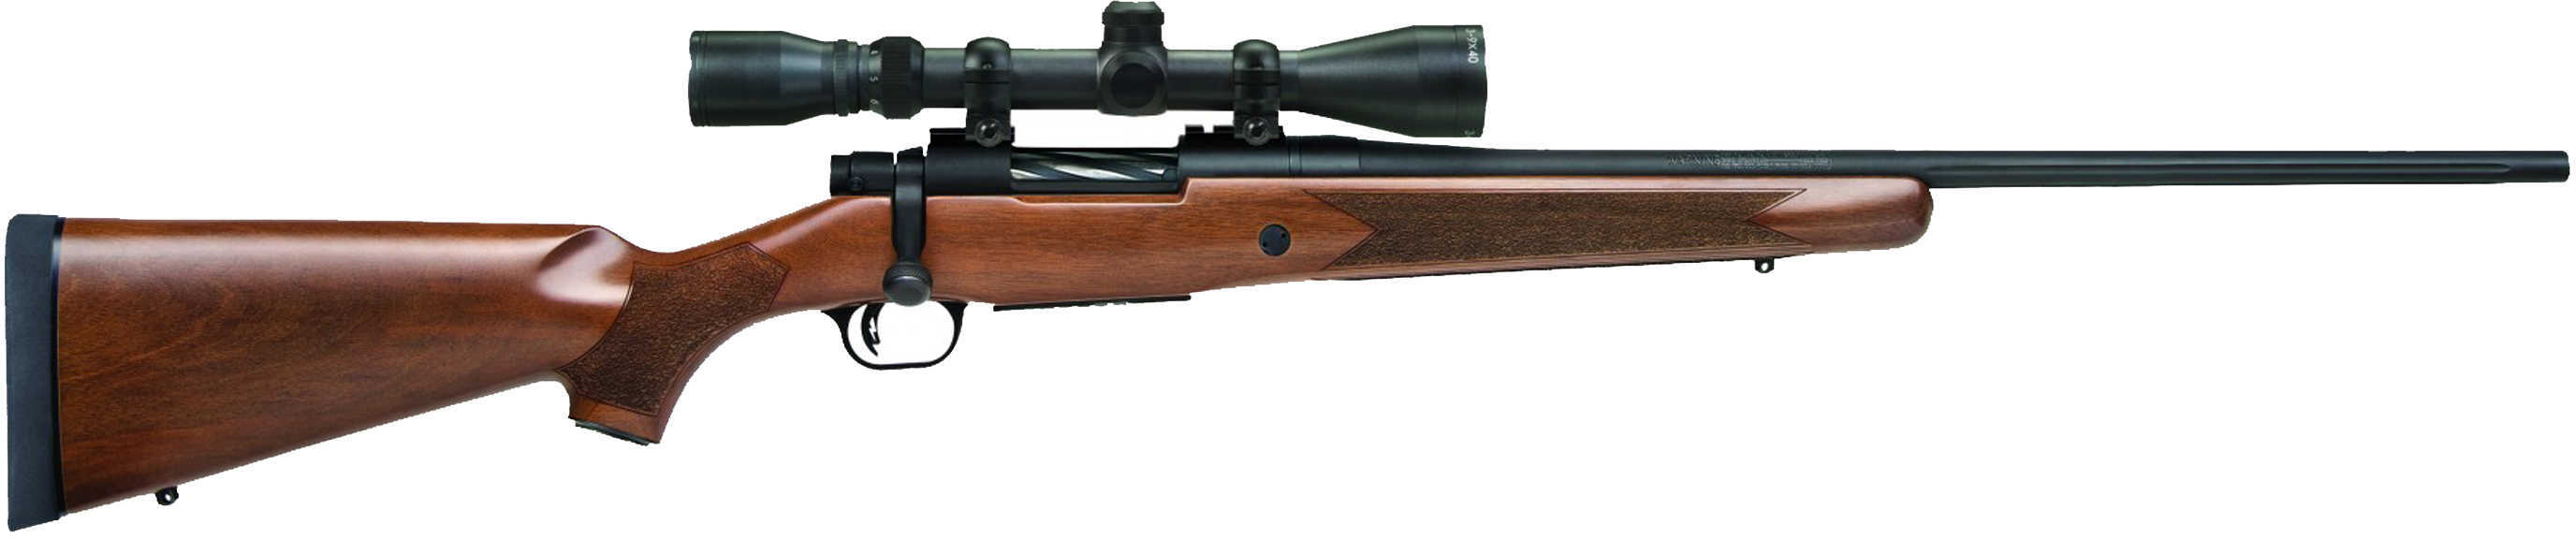 Mossberg Patriot 270 Winchester 22" Fluted Blue Barrel Walnut Stock 3x9x40mm Scope Combo Package Bolt Action Rifle27883